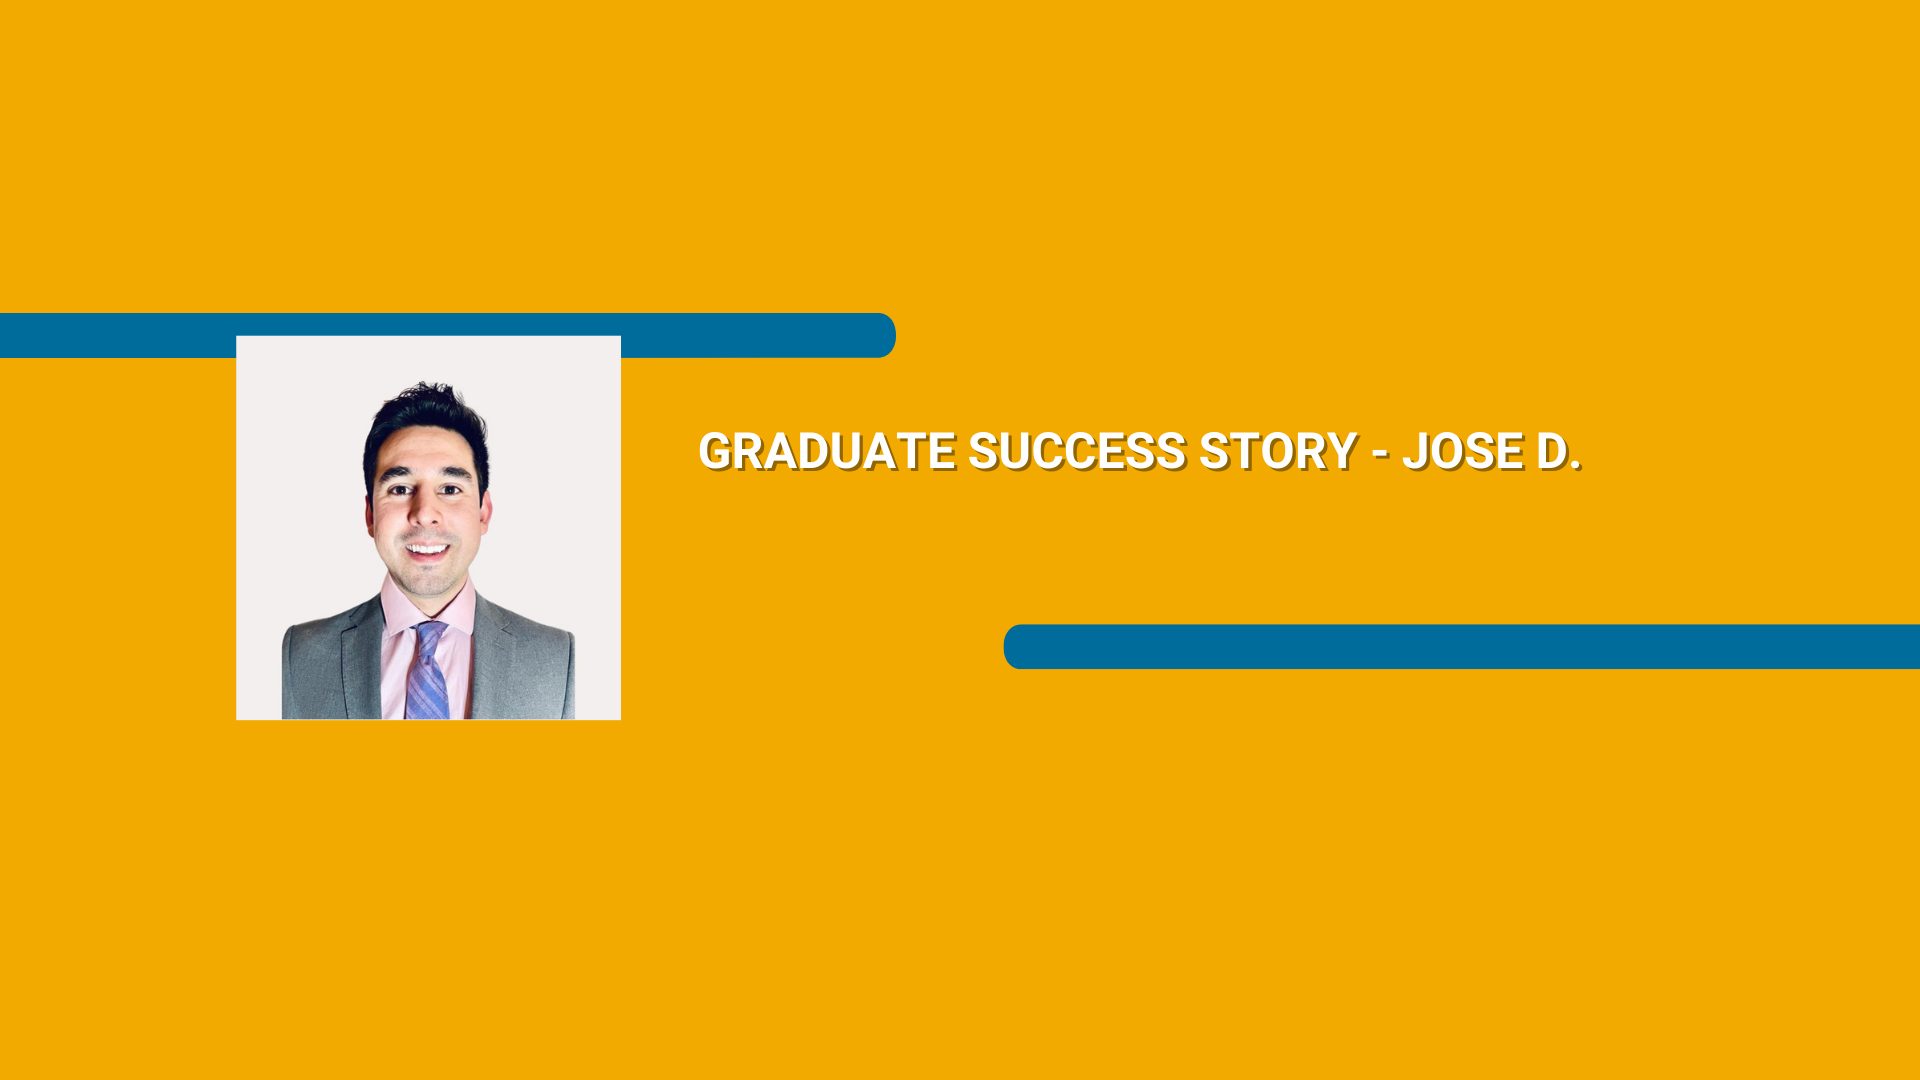 Orange rectangle with a picture of a man wearing a suit and Graduate Success Story - Jose D. text in white font